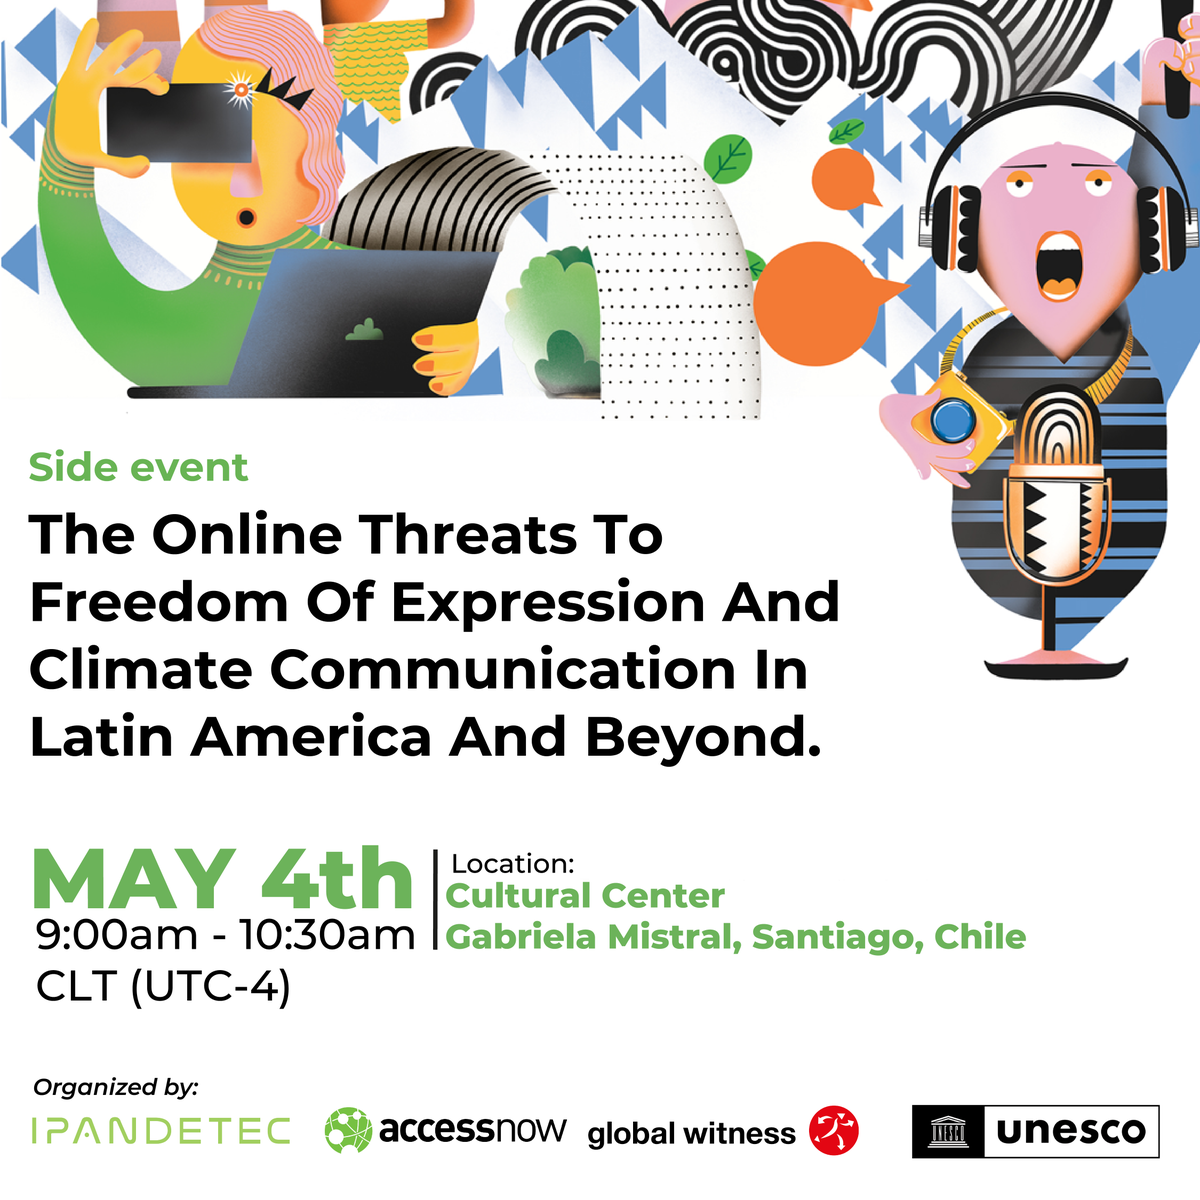 EVENT 🗣 Together with @accessnow and @ipandetec, we’ll be at the @UNESCO World Press Freedom Day talking about climate communication and the online dangers to freedom of expression. Find out more & join us ⬇️ gwitness.org/4dcvUmM #WorldPressFreedomDay